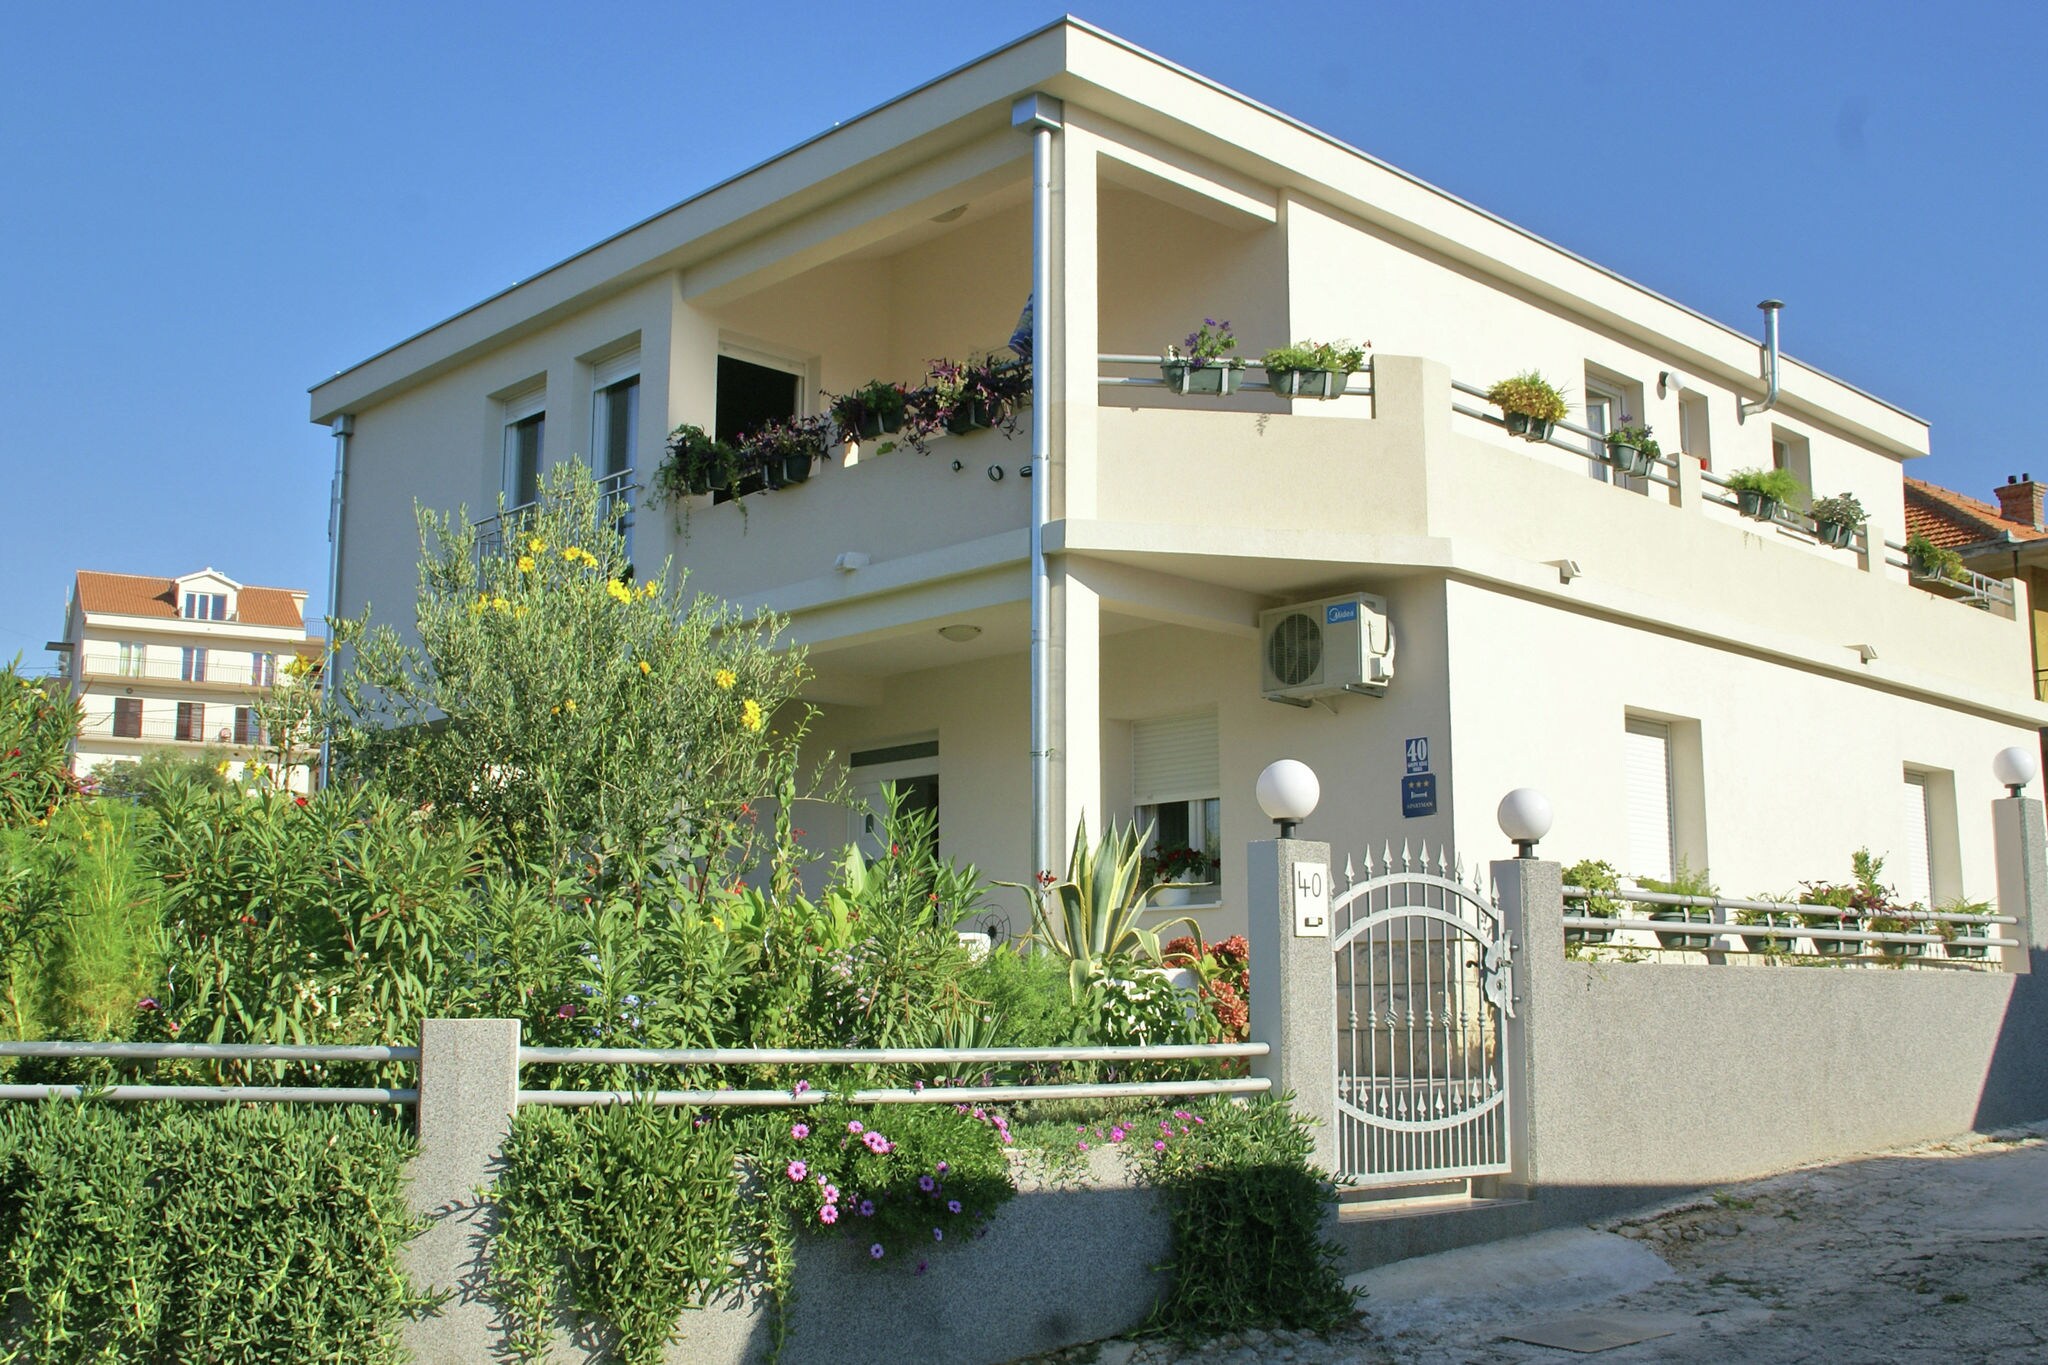 Beautiful apartments just outside Trogir (500 m), only 100 m away from the beach